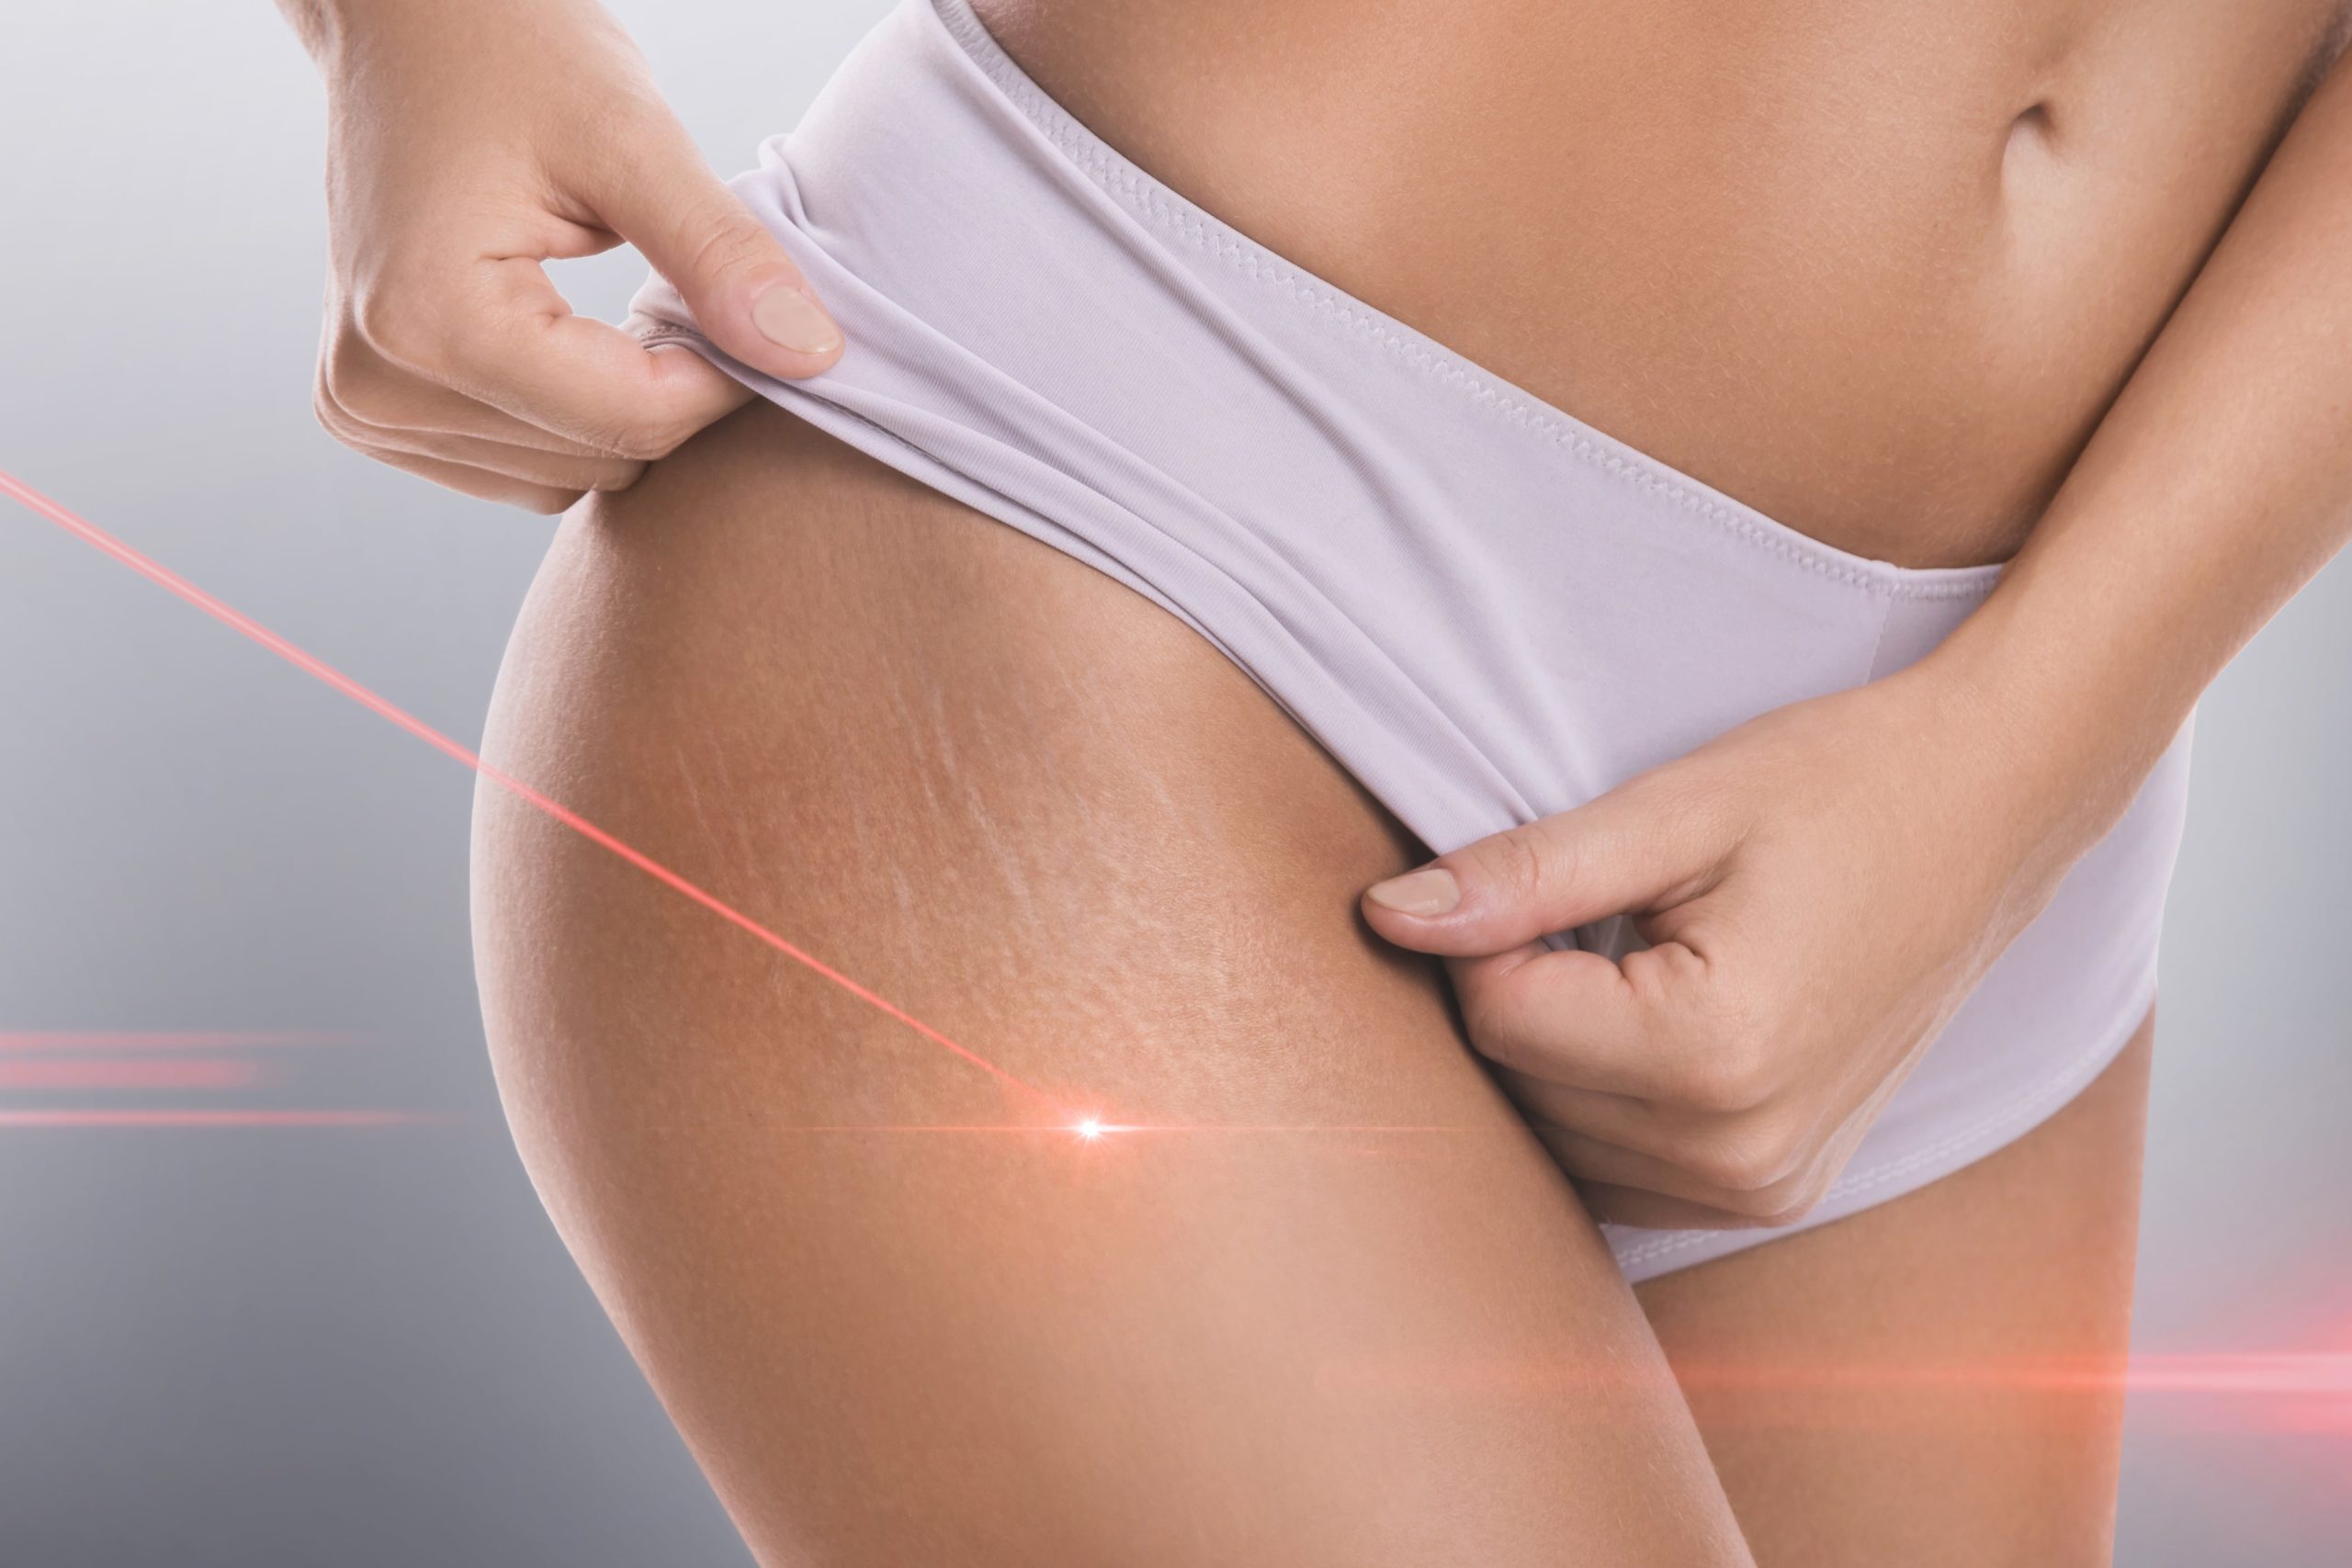 What Is Chrome Laser Treatment, And Will It Work To Improve Skin Texture